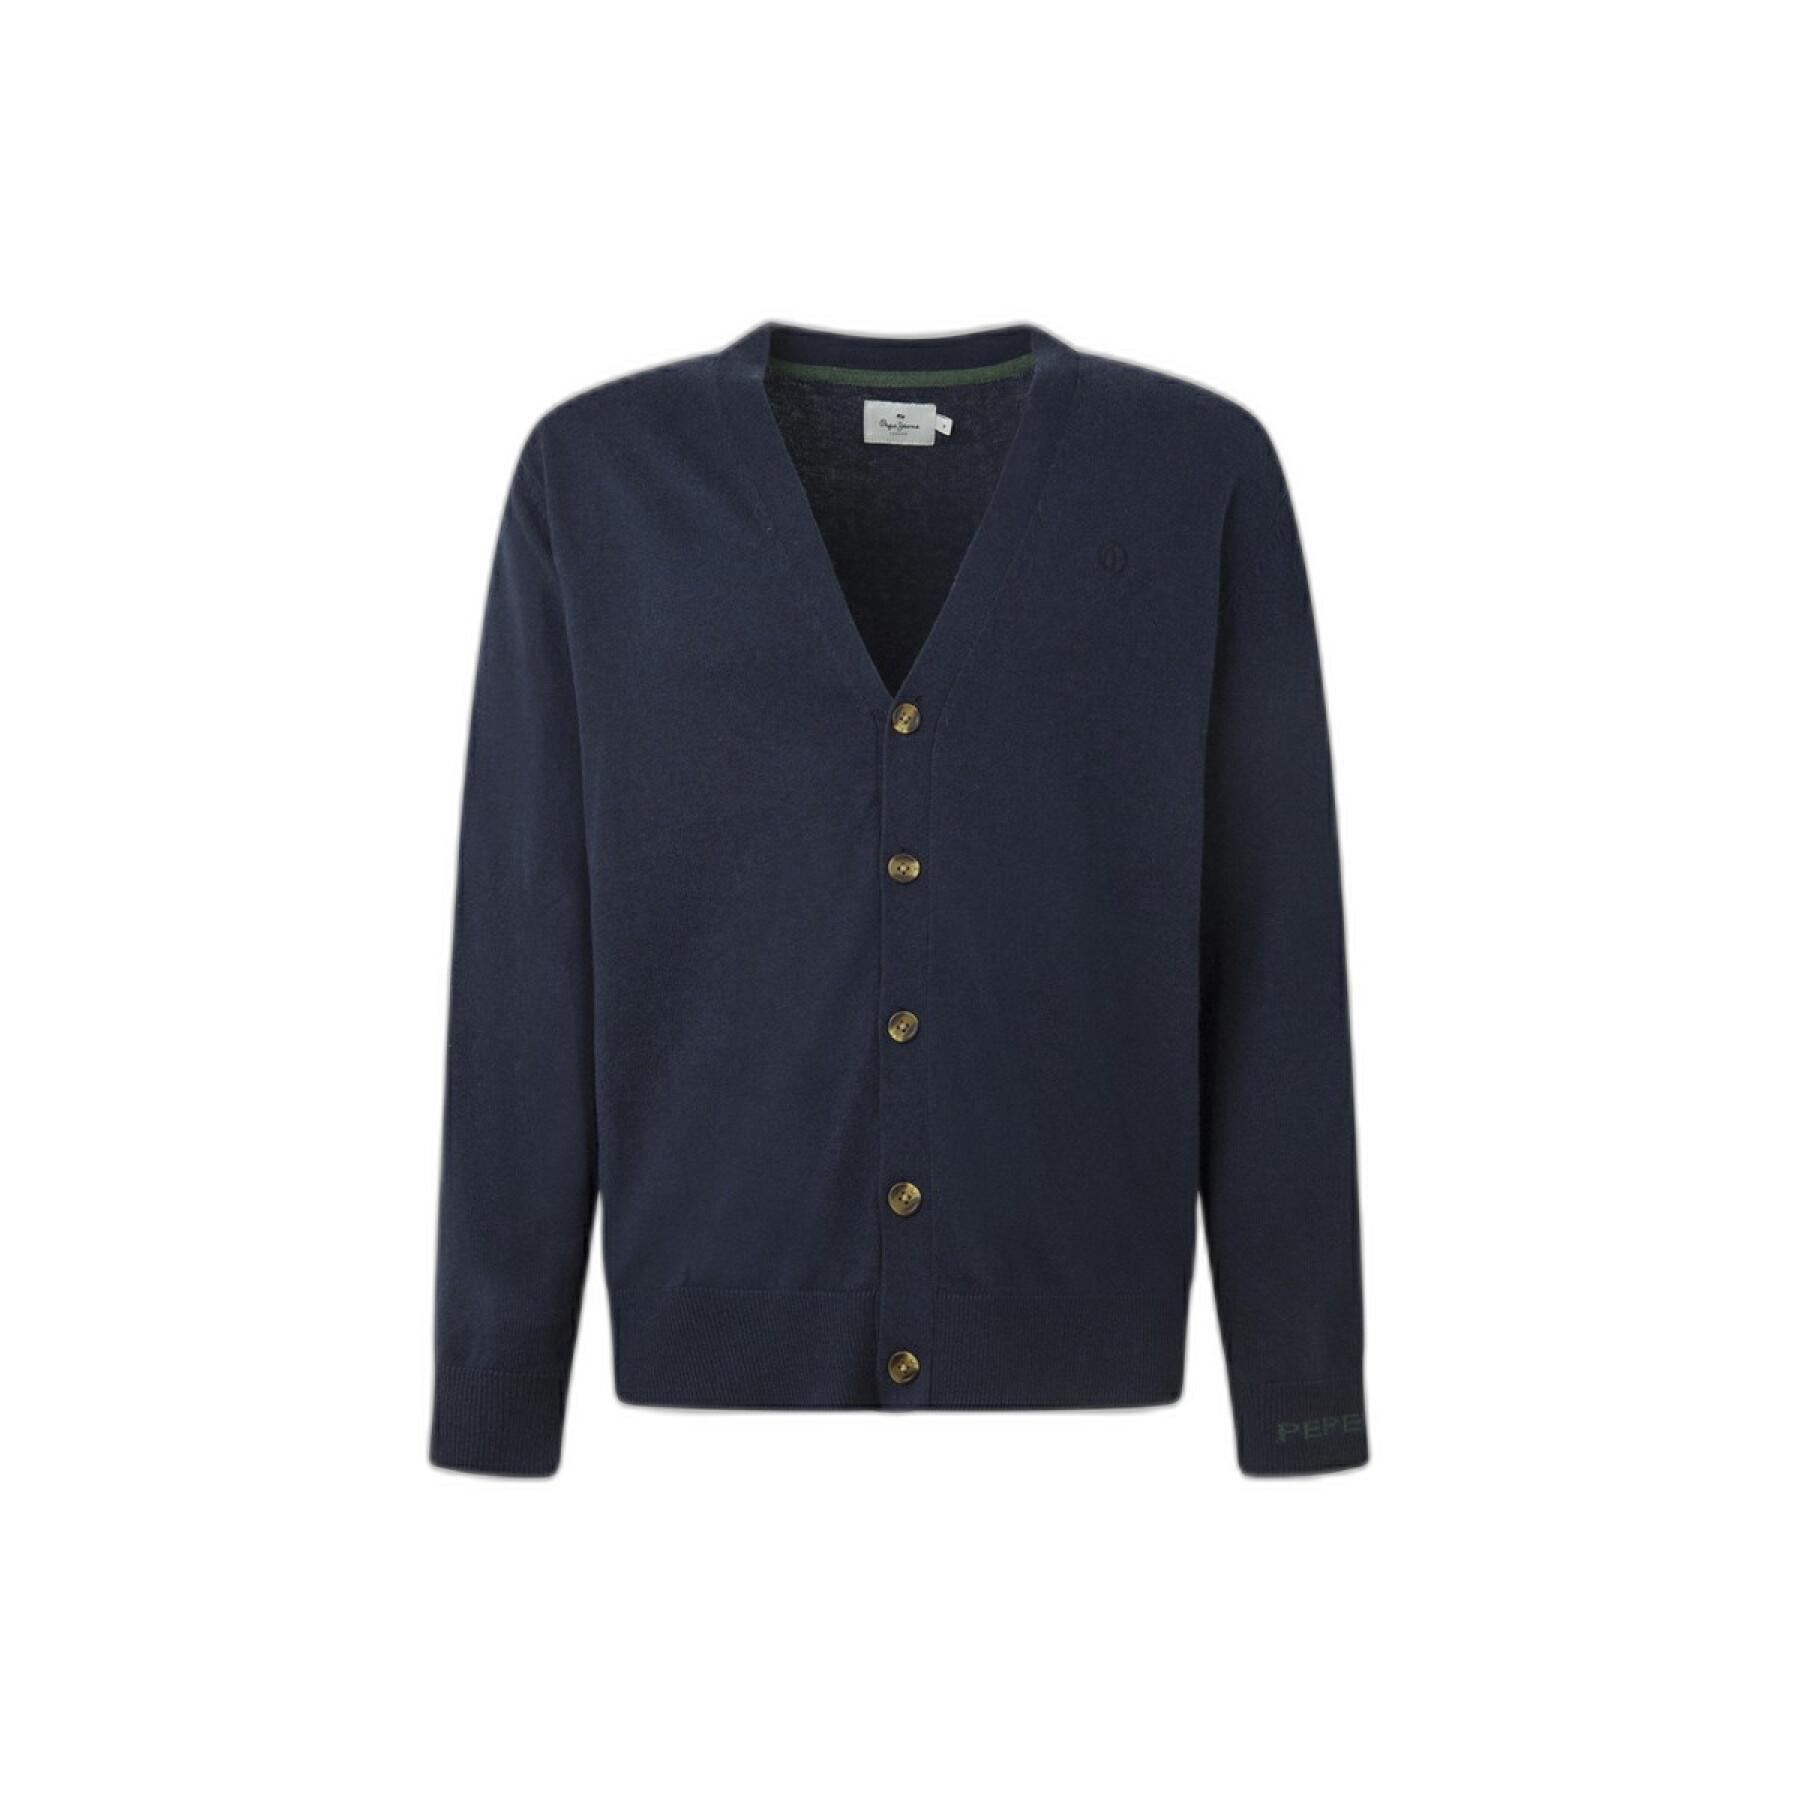 Cardigan Pepe Jeans Andre